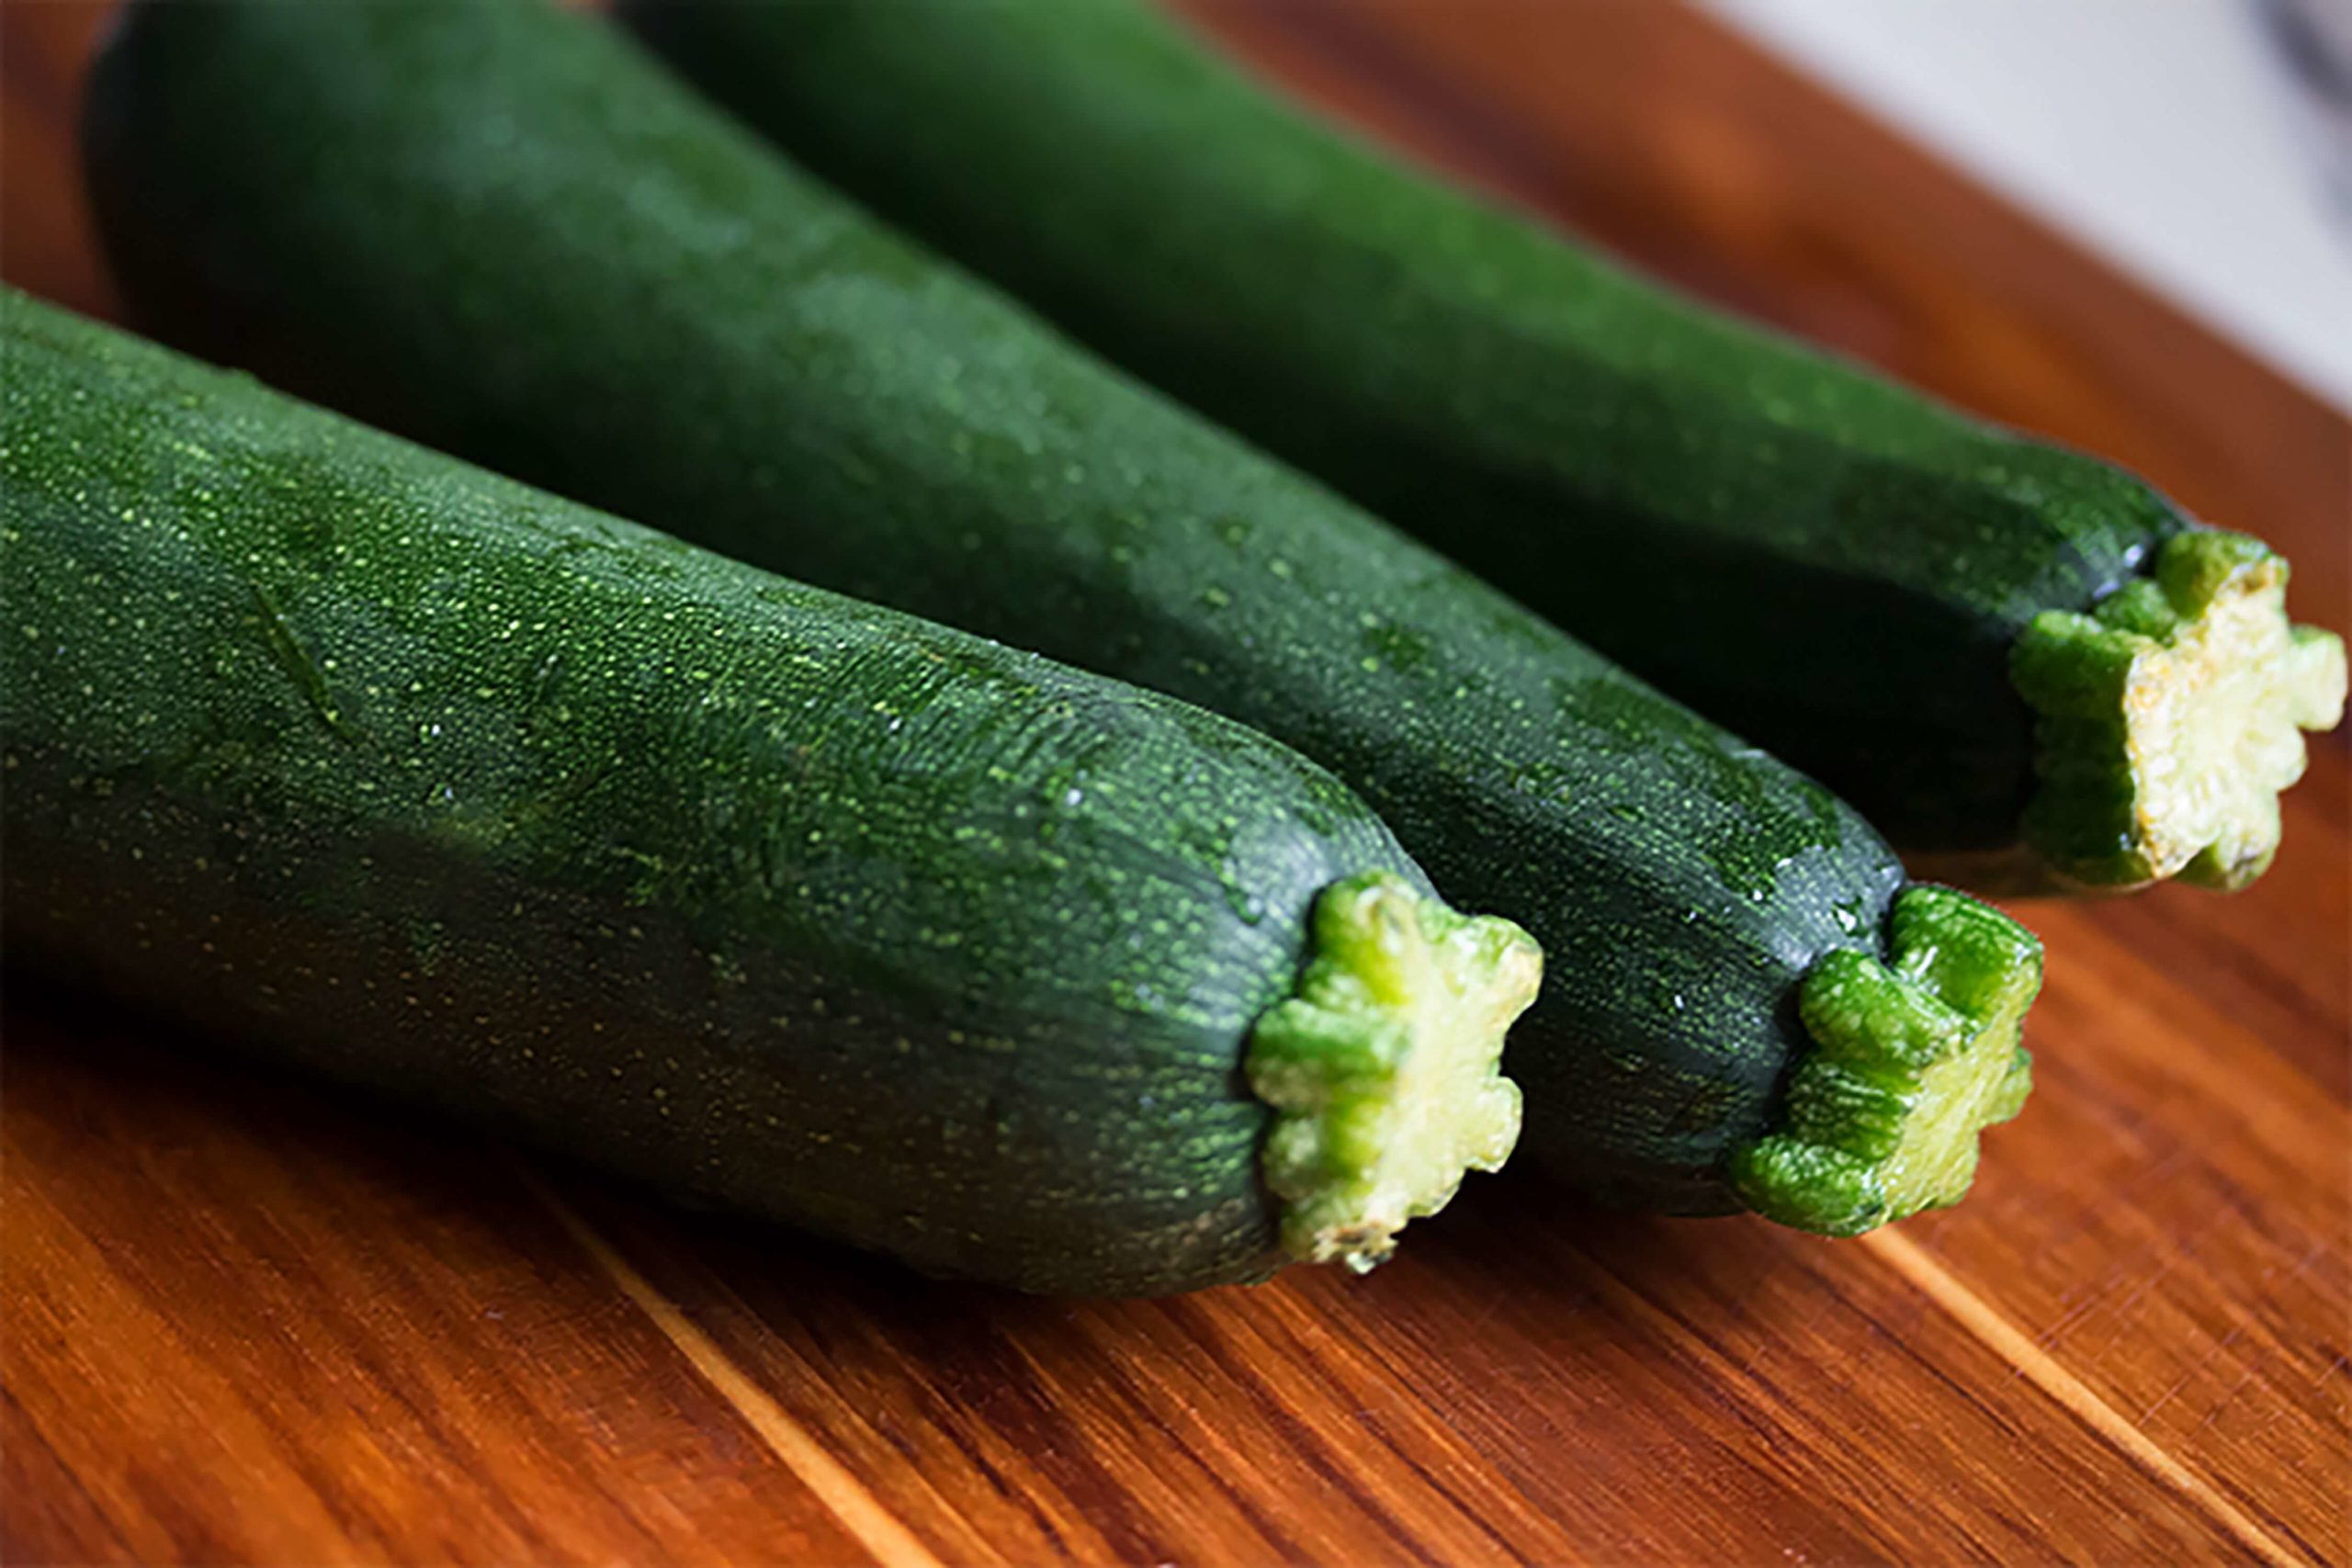 You are currently viewing Recettes simples et healthy avec des courgettes